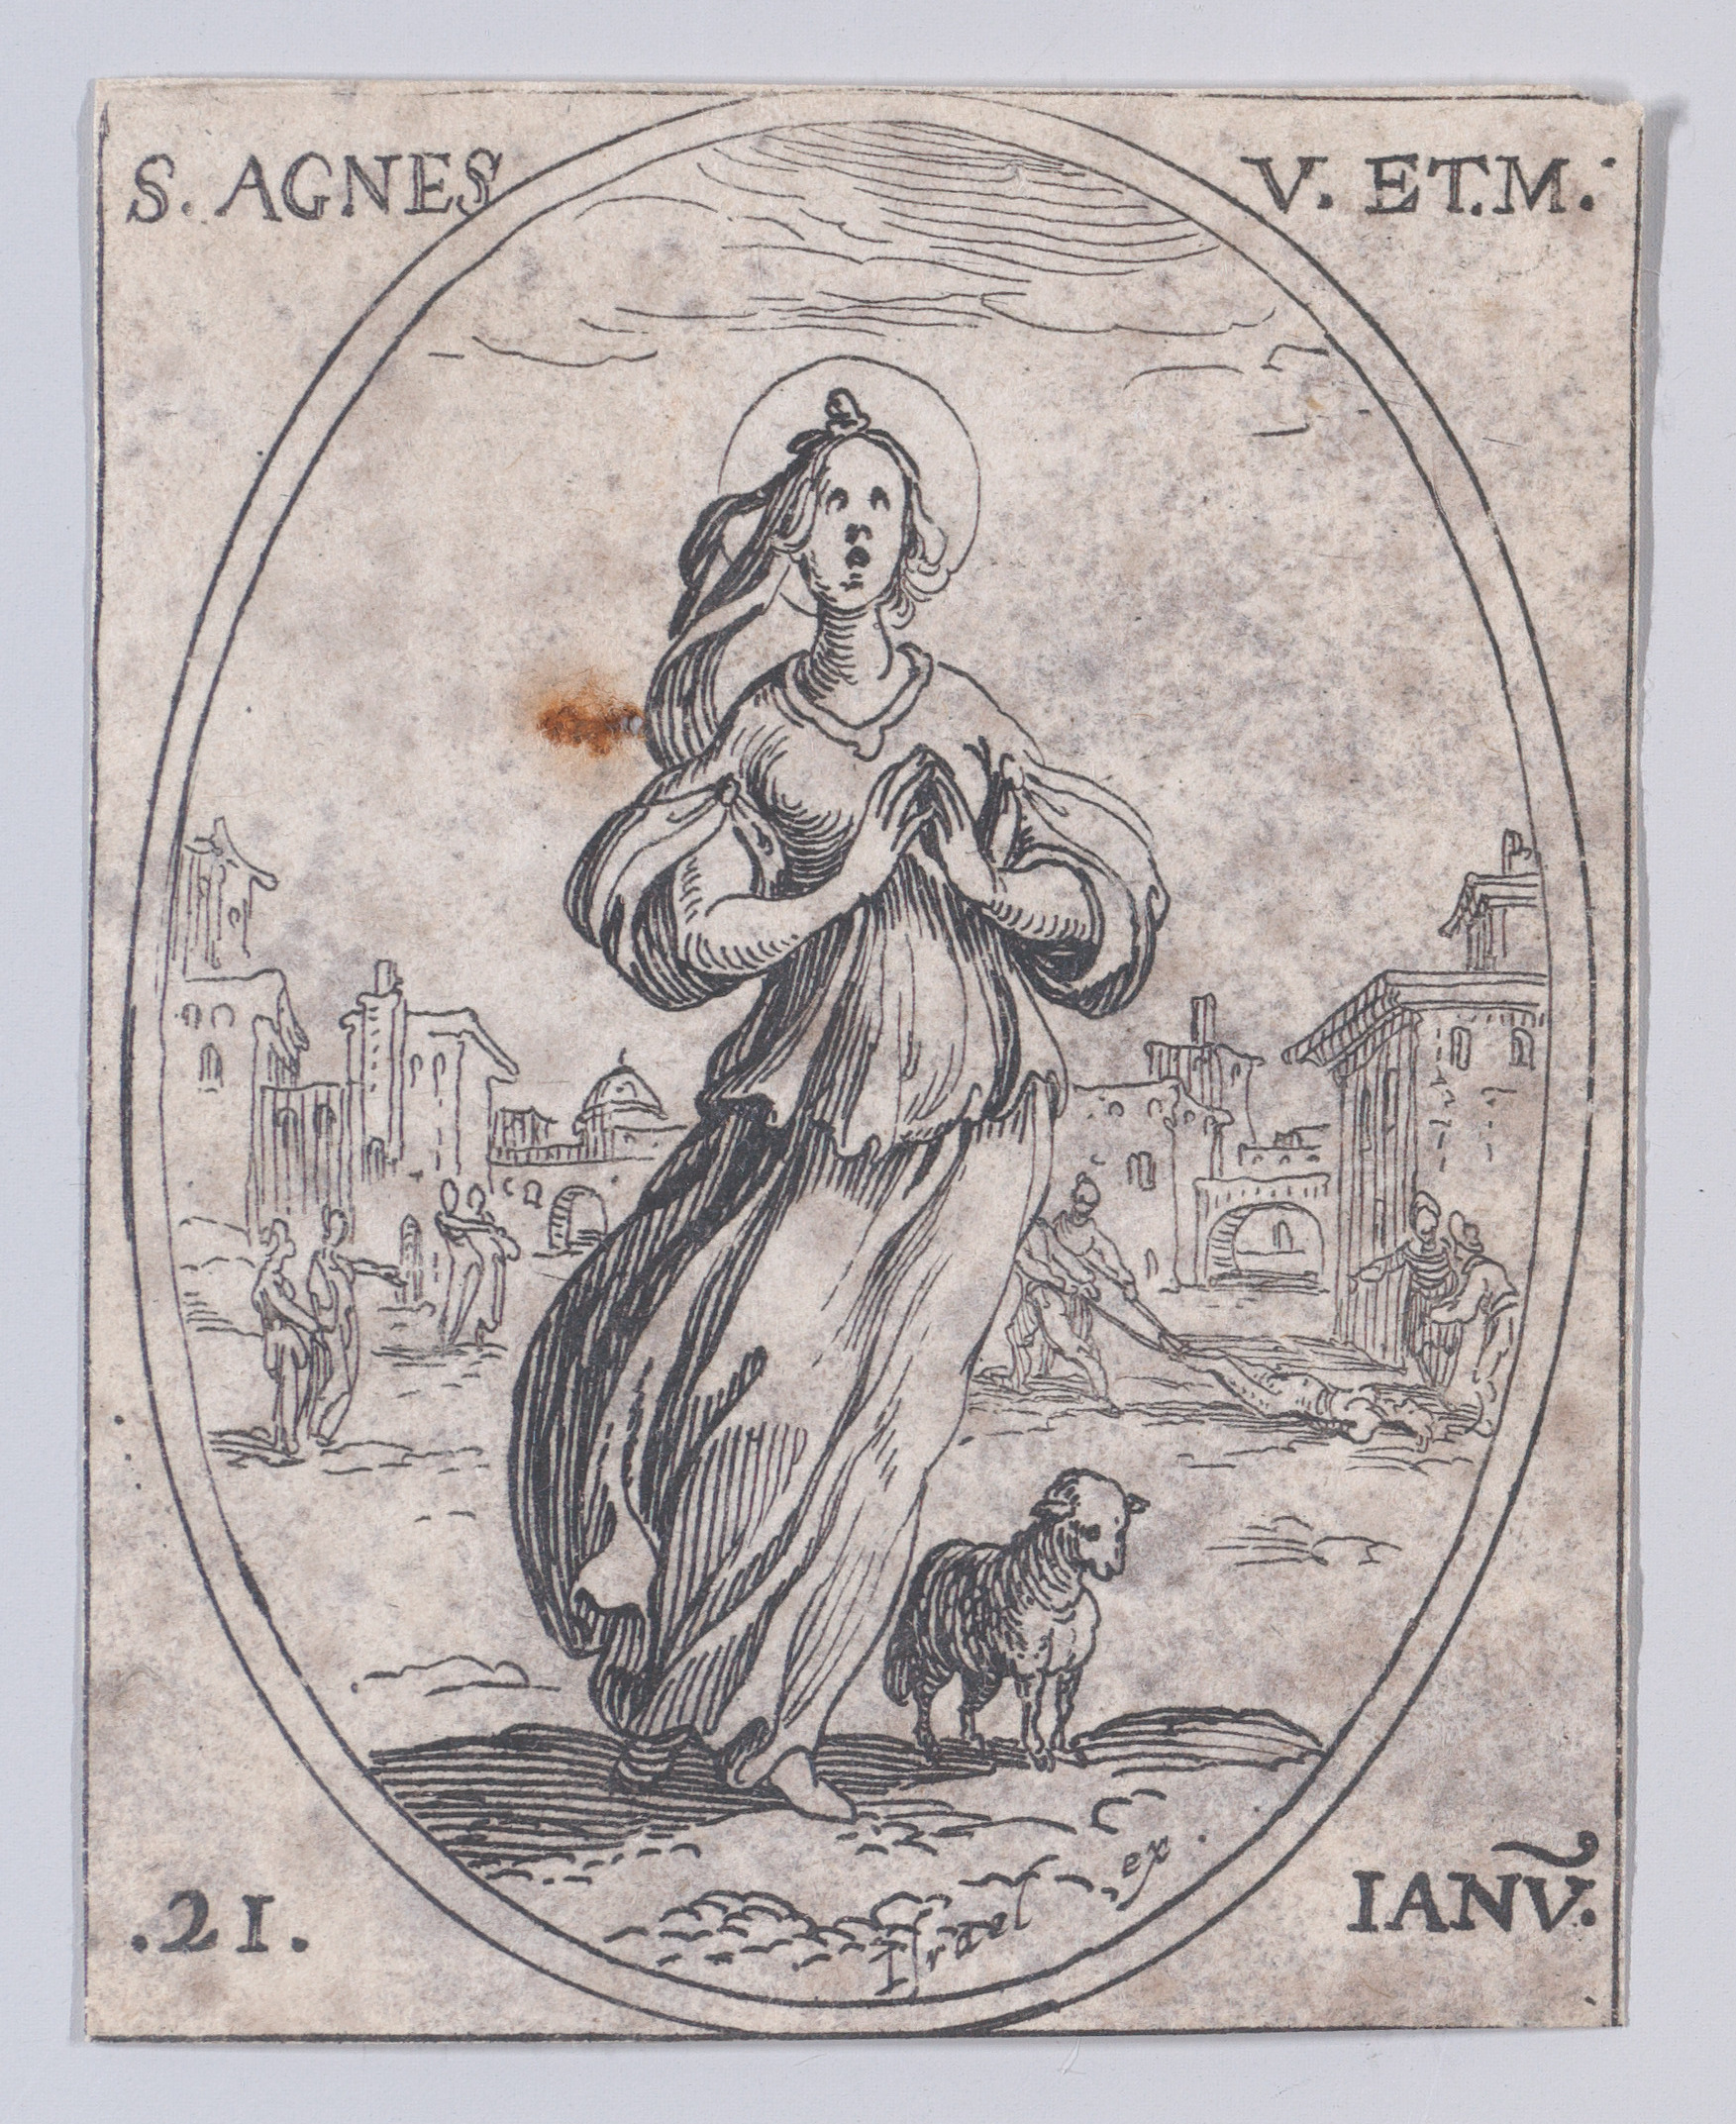 Ste. Agnés, vierge et martyre (St. Agnes, Virgin and Martyr), January 21st, from Les Images De Tous Les Saincts et Saintes de L'Année (Images of All of the Saints and Religious Events of the Year), Jacques Callot (French, Nancy 1592–1635 Nancy), Etching; second state of two (Lieure)